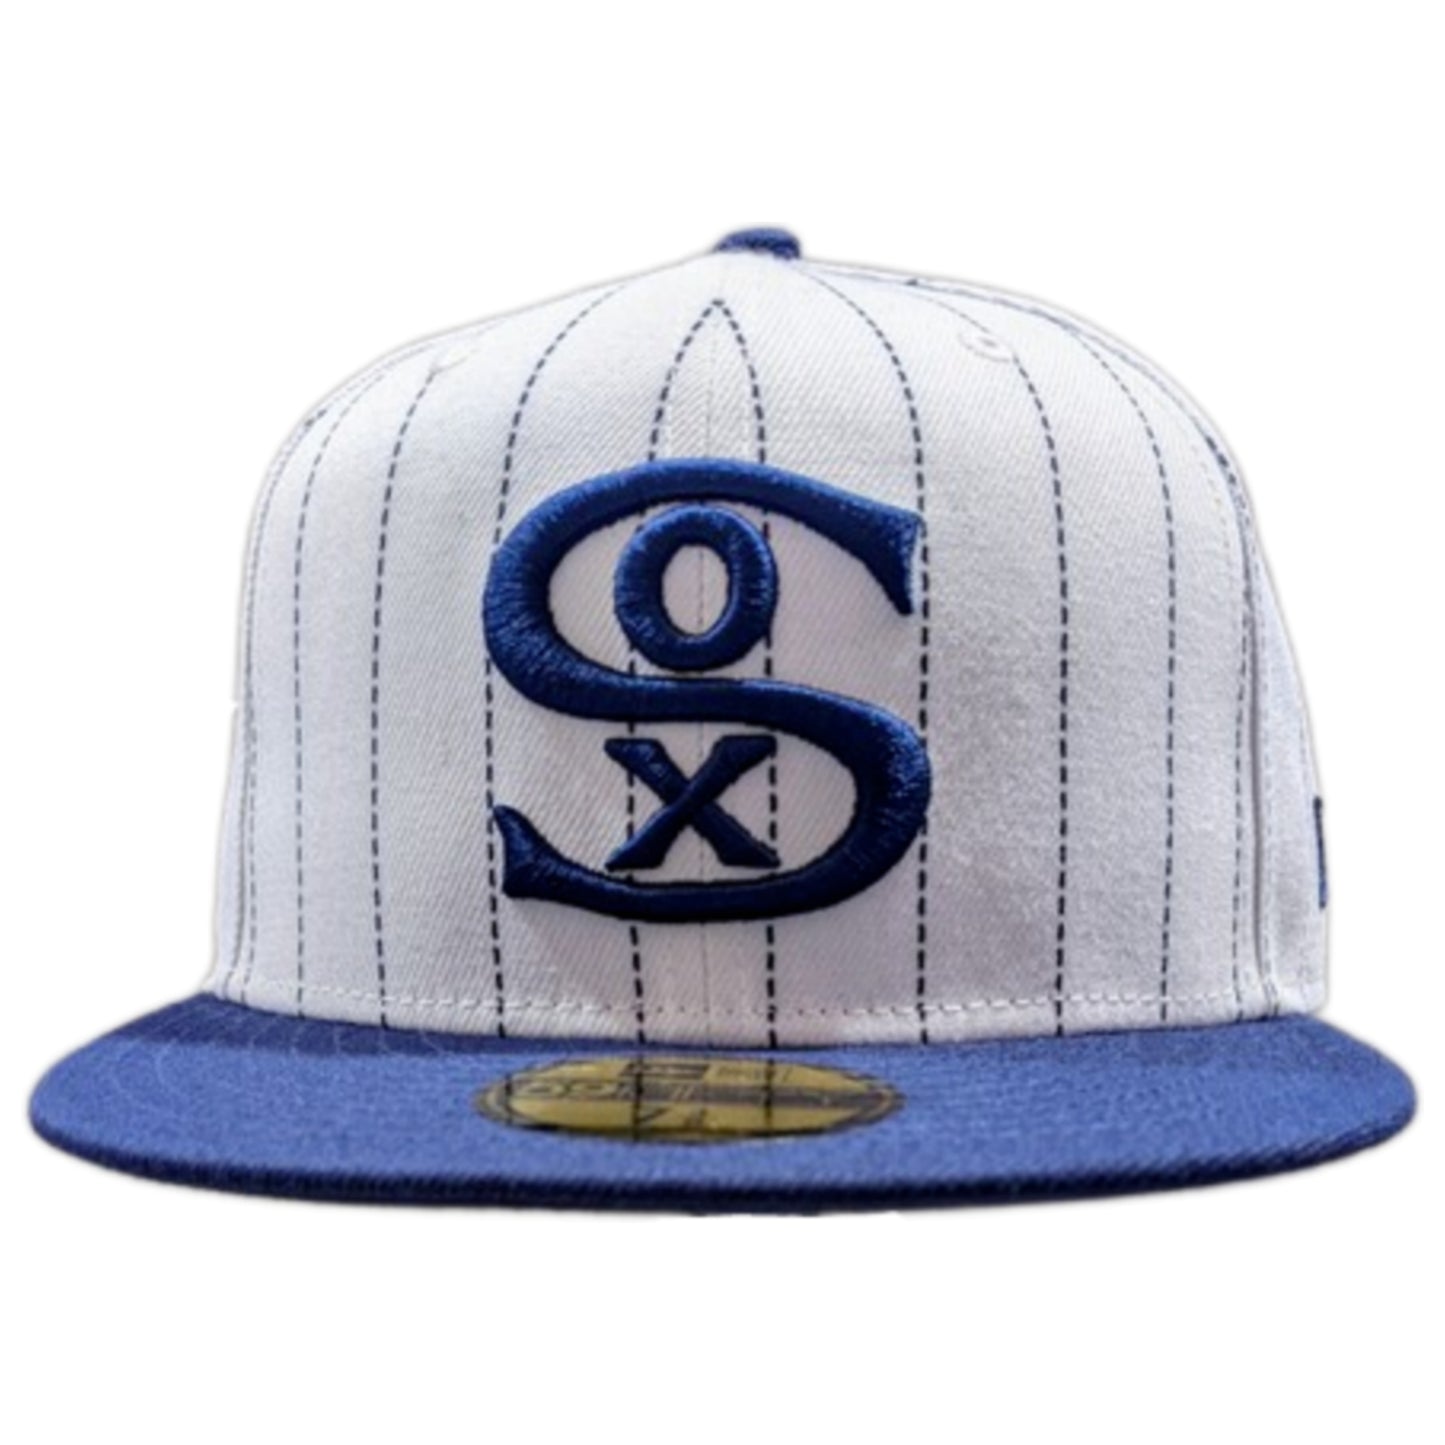 Chicago White Sox Field Of Dreams Mashup New Era White/Navy 59FIFTY Fitted Hat